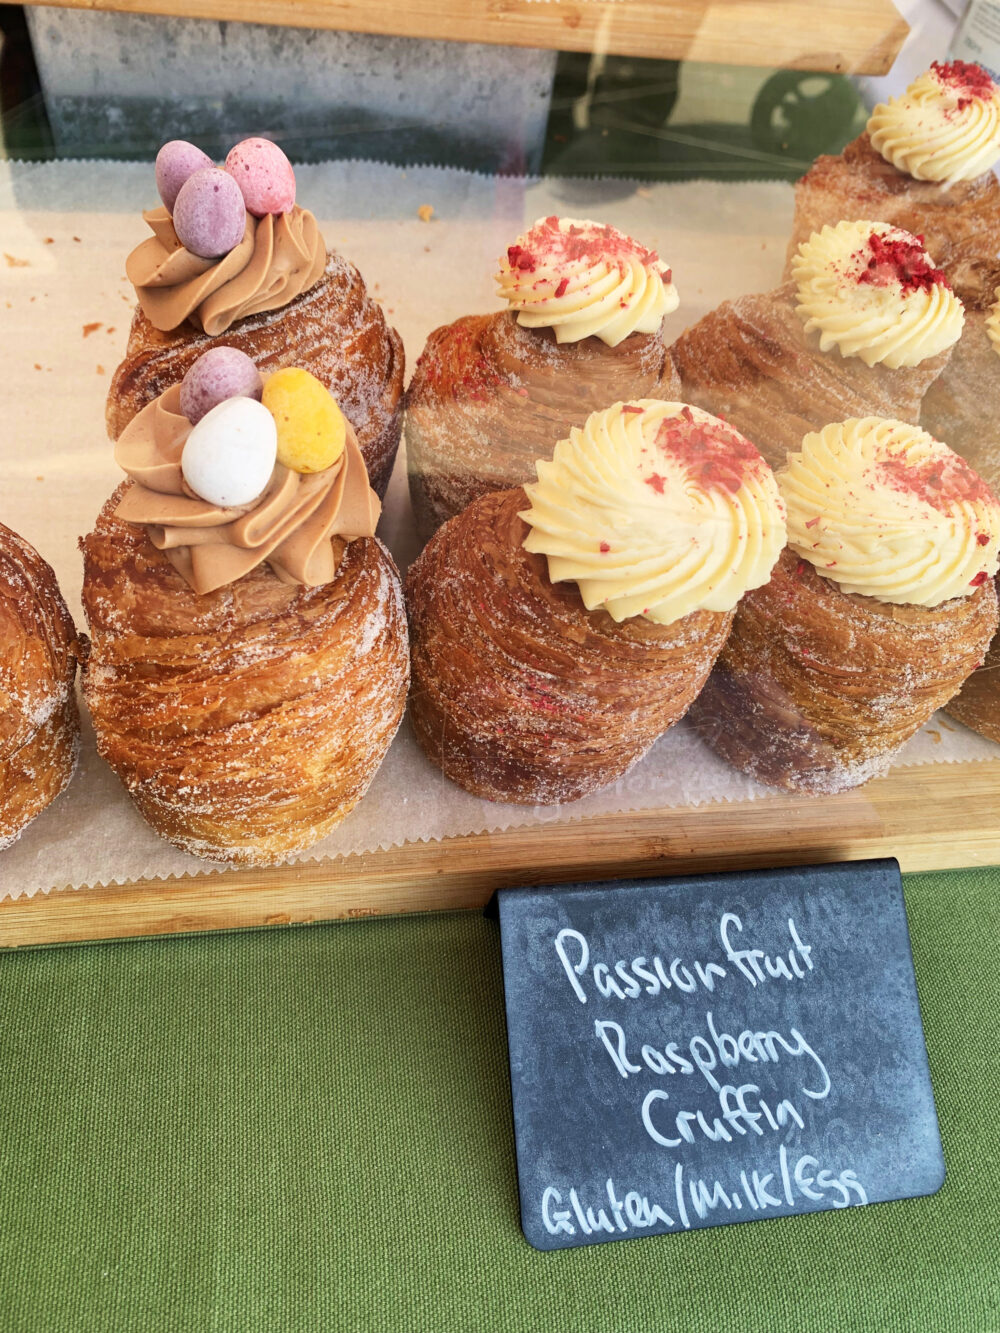 French patisserie cruffins